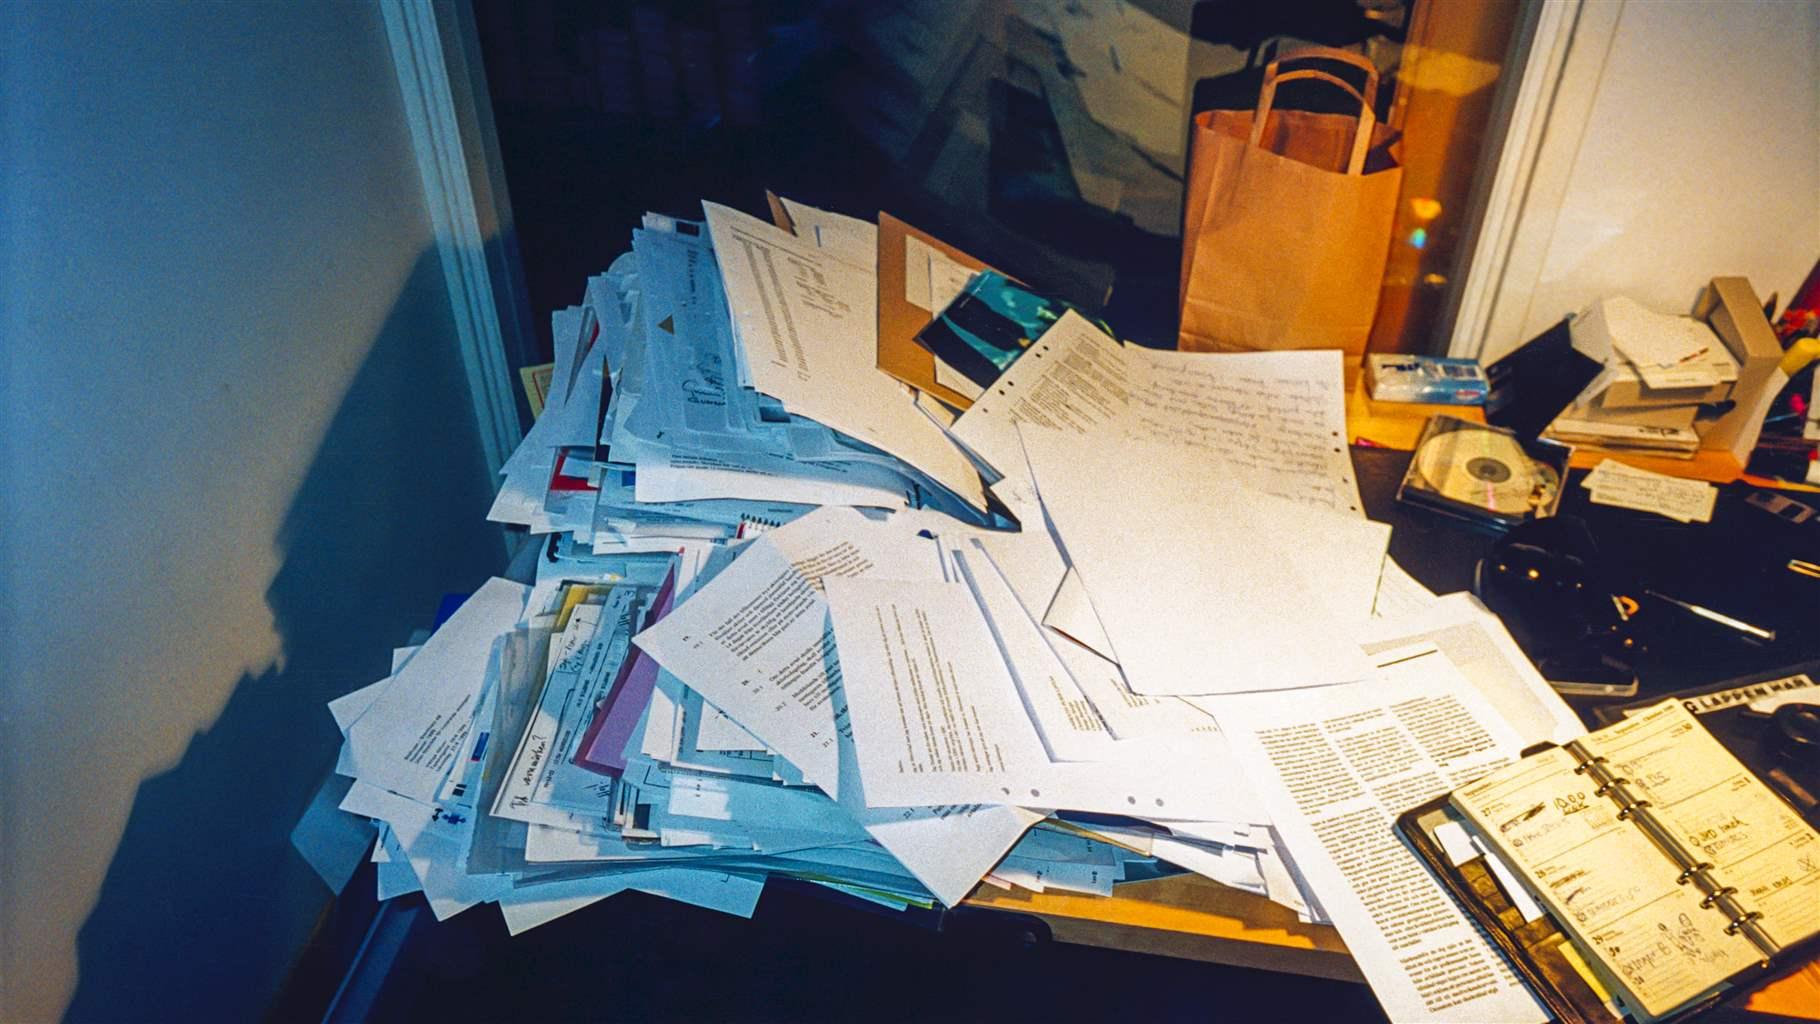 A close-up view of a cluttered desk strewn with large stacks of paper, a day planner, CD-ROM, and other items. The mess casts a gray shadow on the wall to the left and reflects in the window behind the desk.